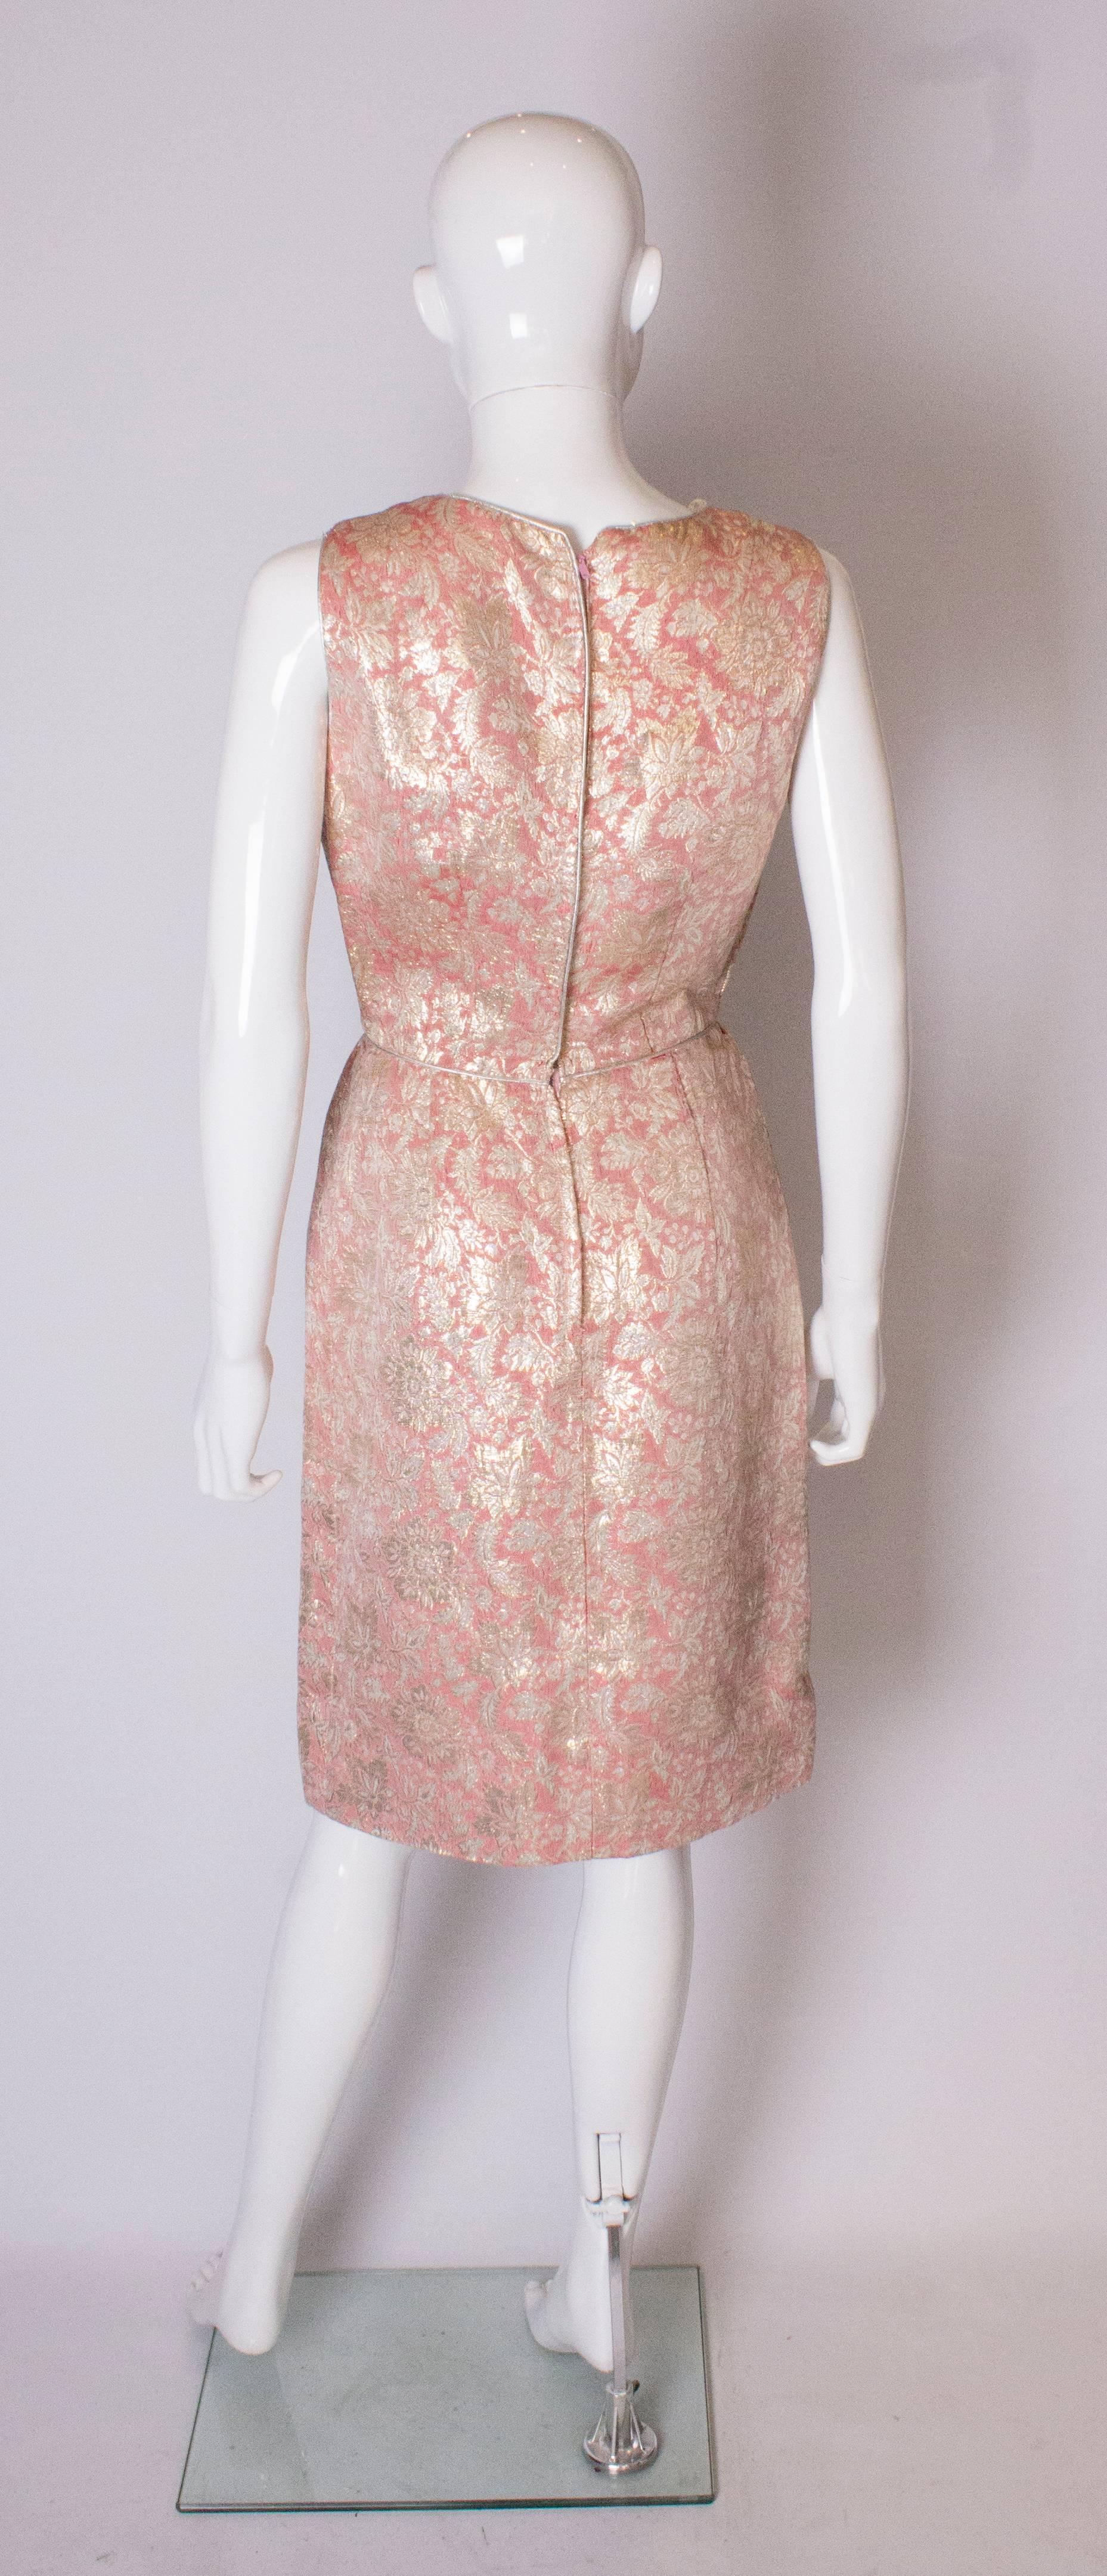 A Vintage 1950s  Metallic Brocade Cocktail Dress In Good Condition For Sale In London, GB